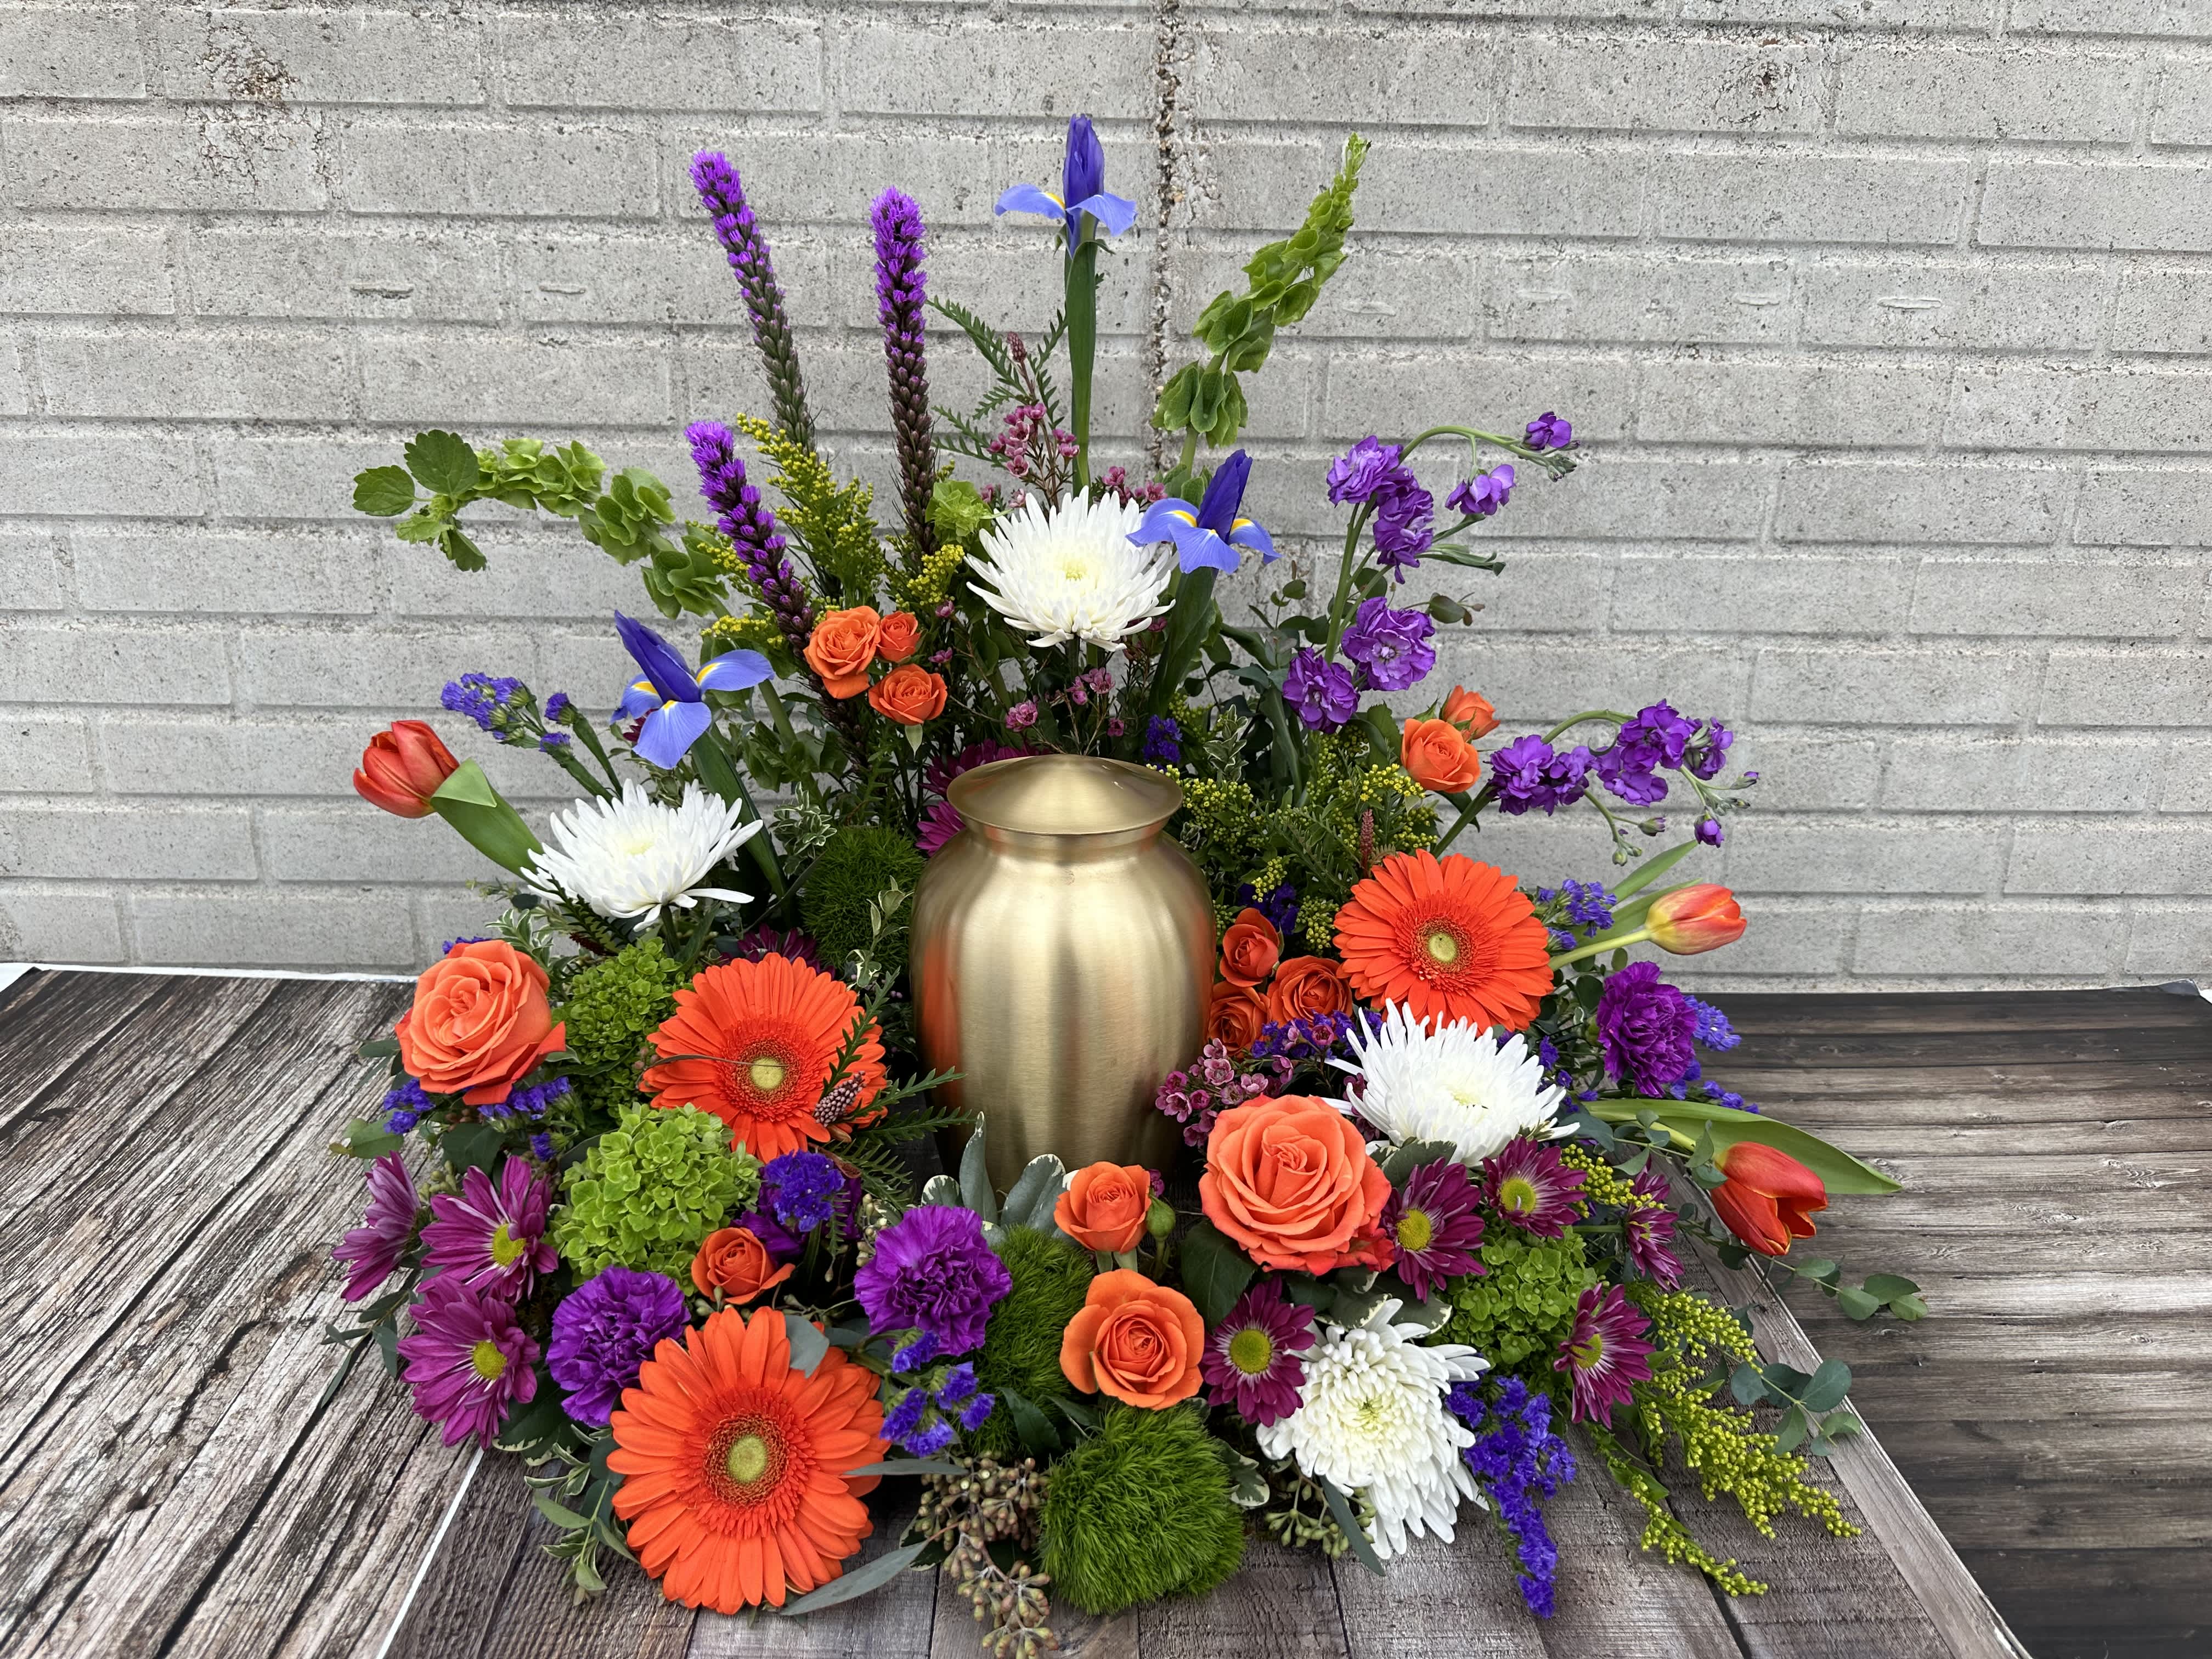 Spring Cremation Adornment  - A large fresh arrangement surrounding an urn to honor your loved one - available in other colors and flowers